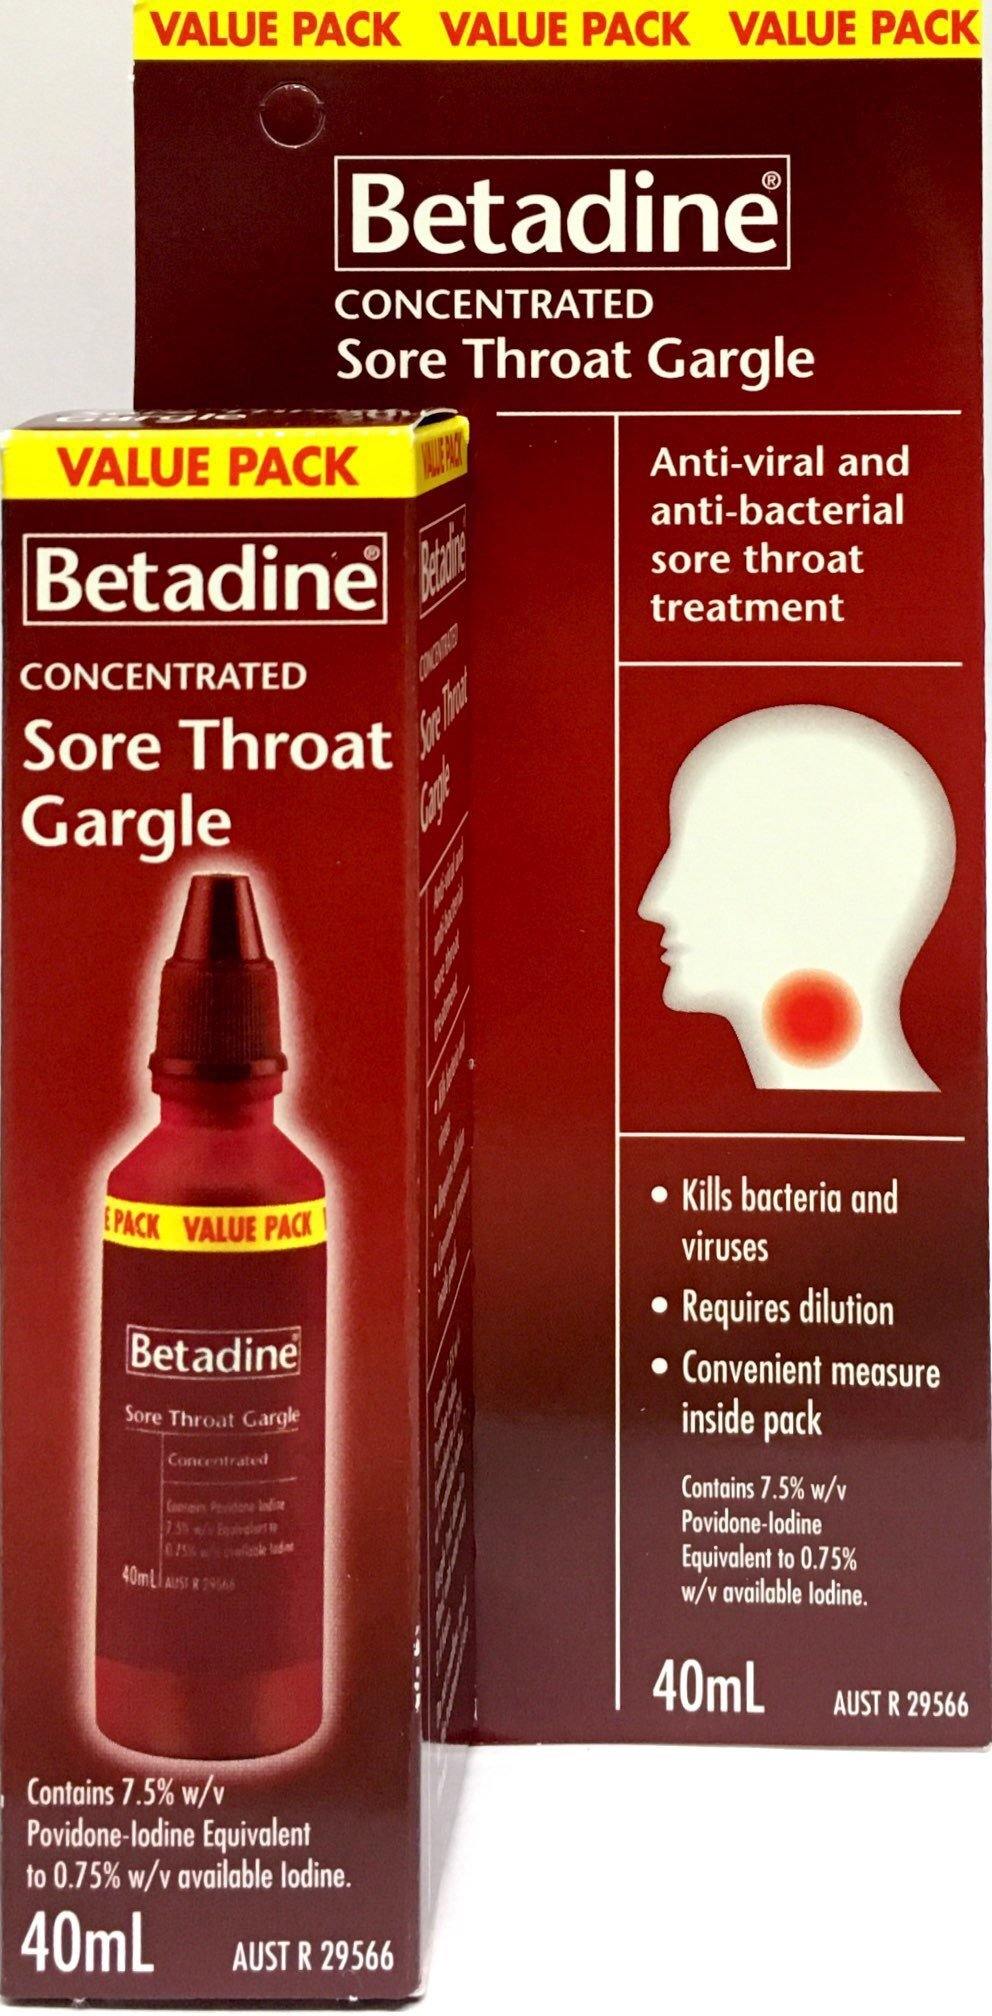 Betadine Concentrated Sore Throat Gargle Value Pack 40ml - DominionRoadPharmacy